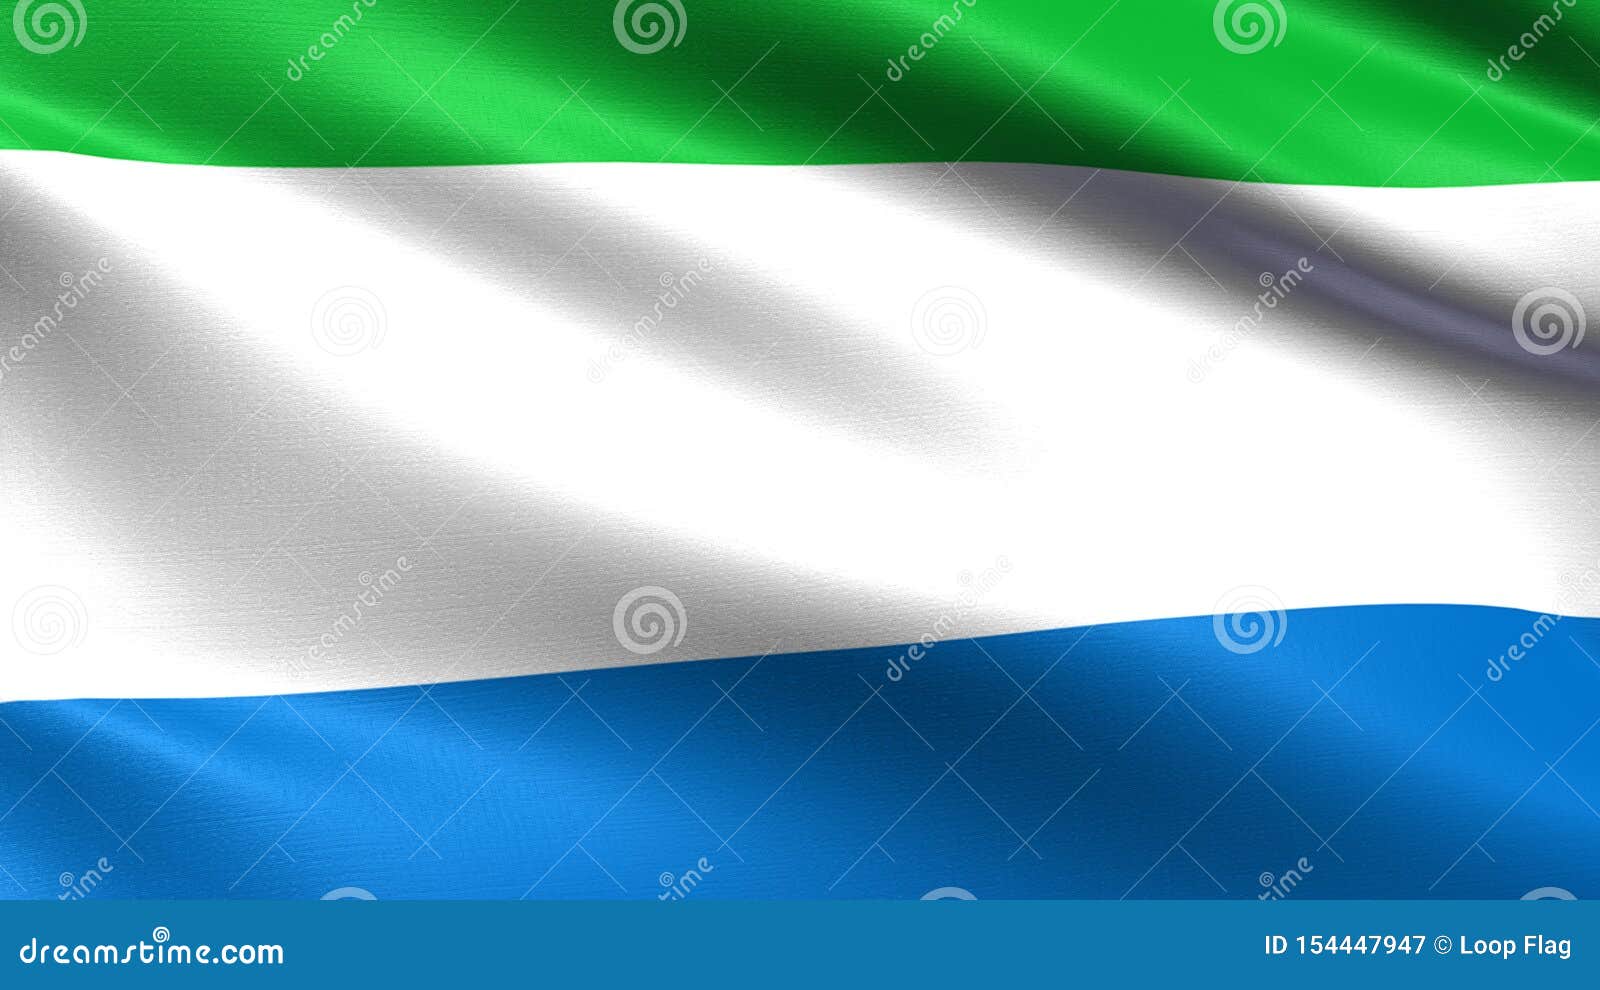 sierra leone flag, with waving fabric texture